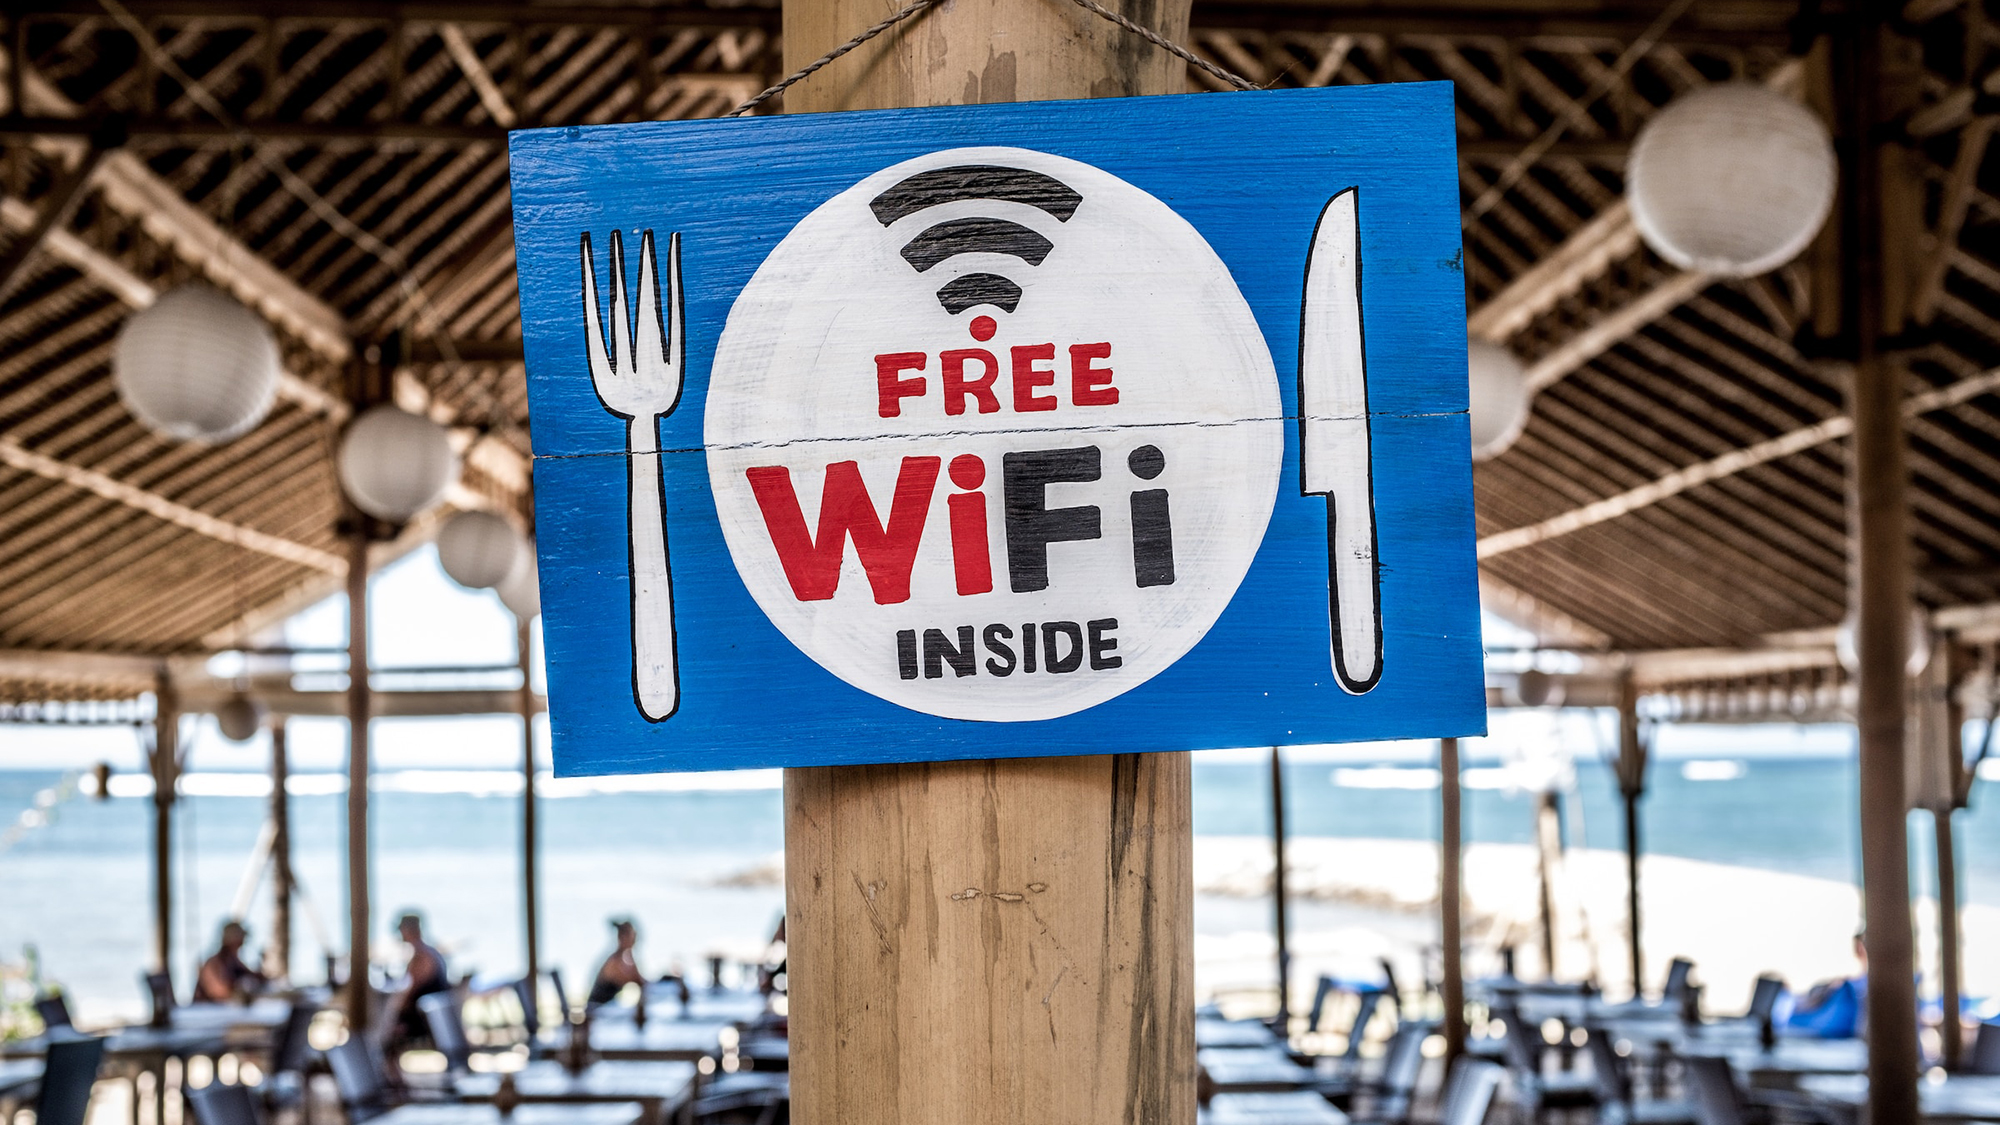 A WiFi sign in a cafe.